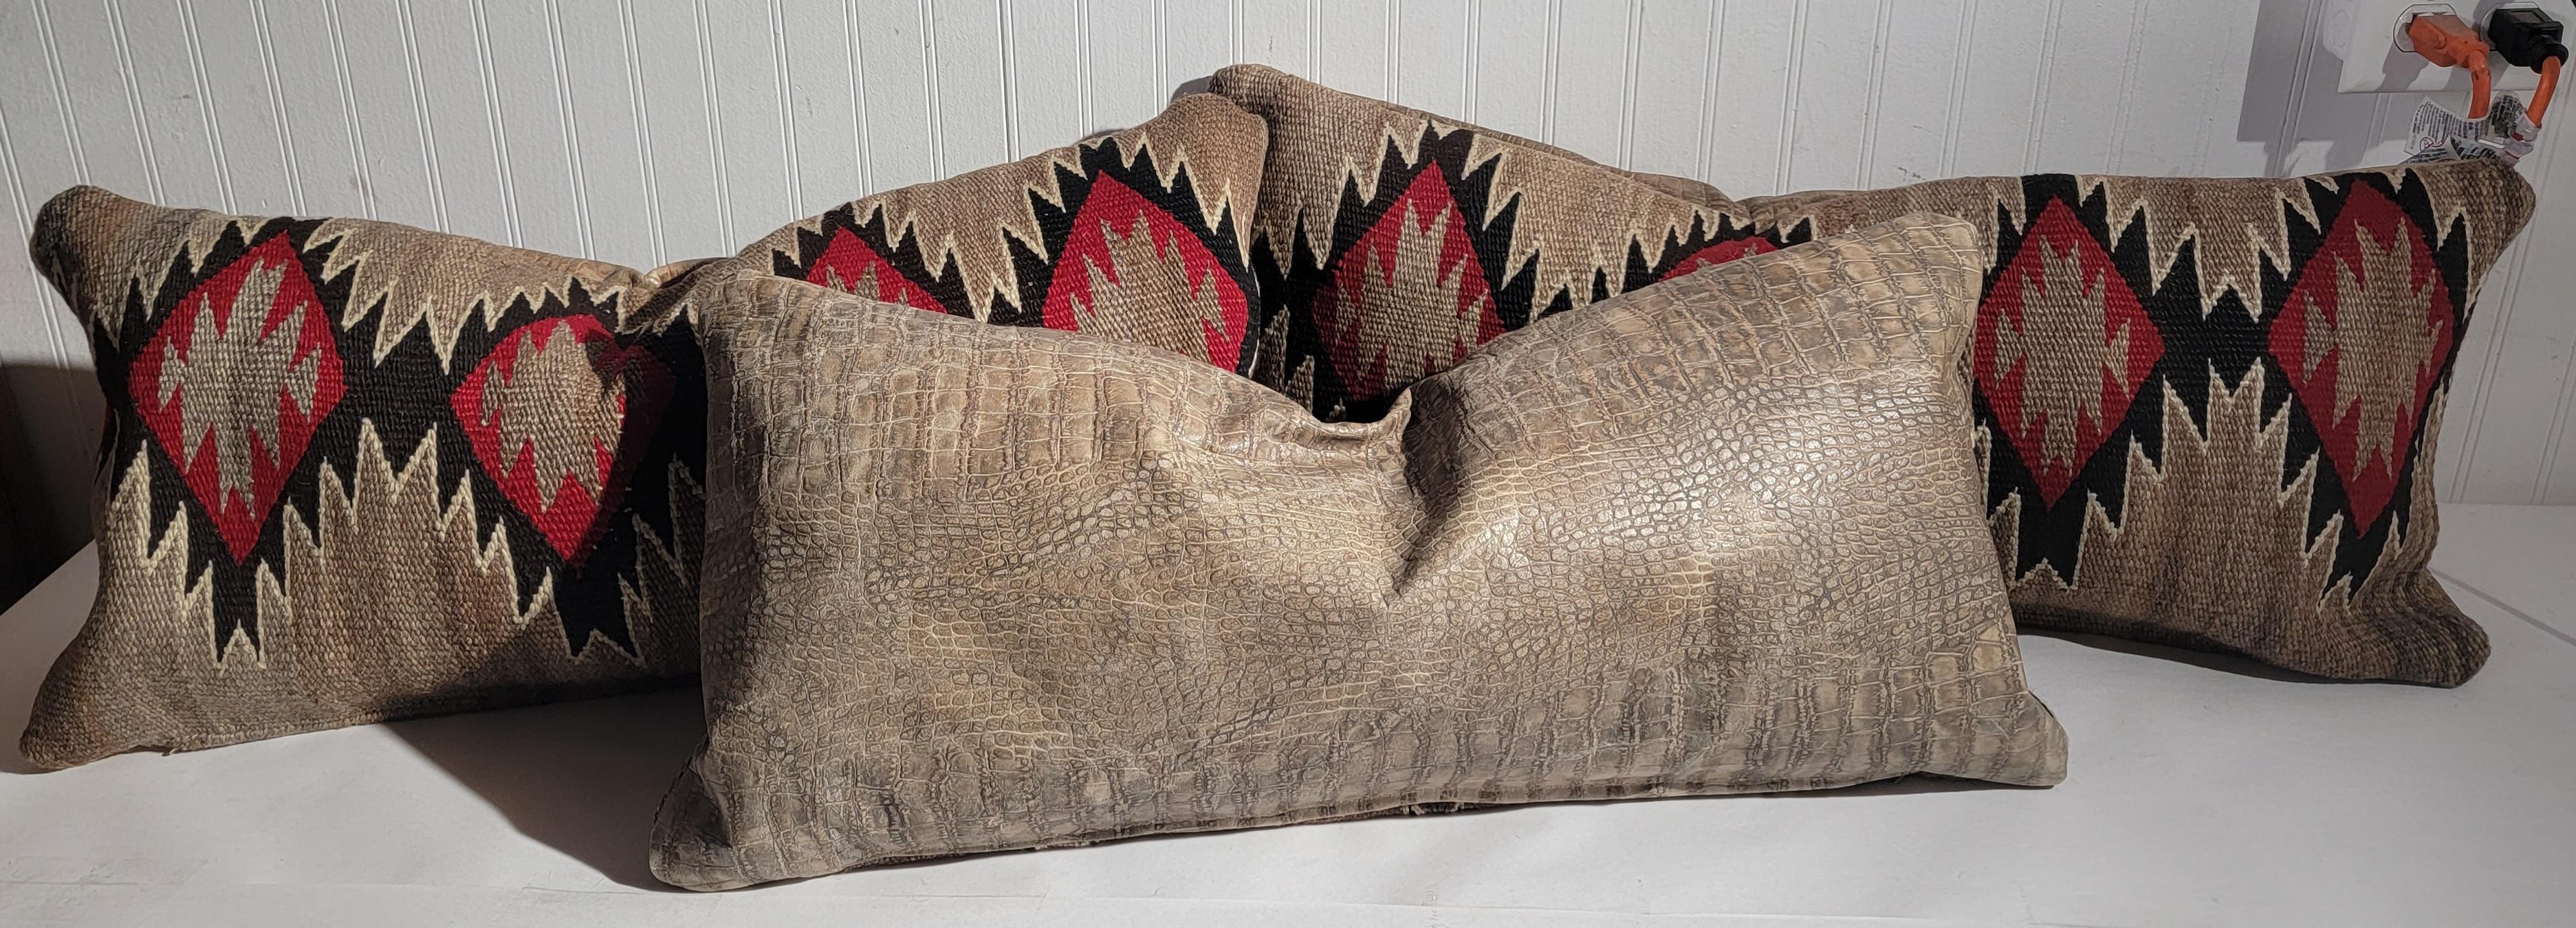 20th Century Navajo Indian Weaving Bolster Pillow -3 For Sale